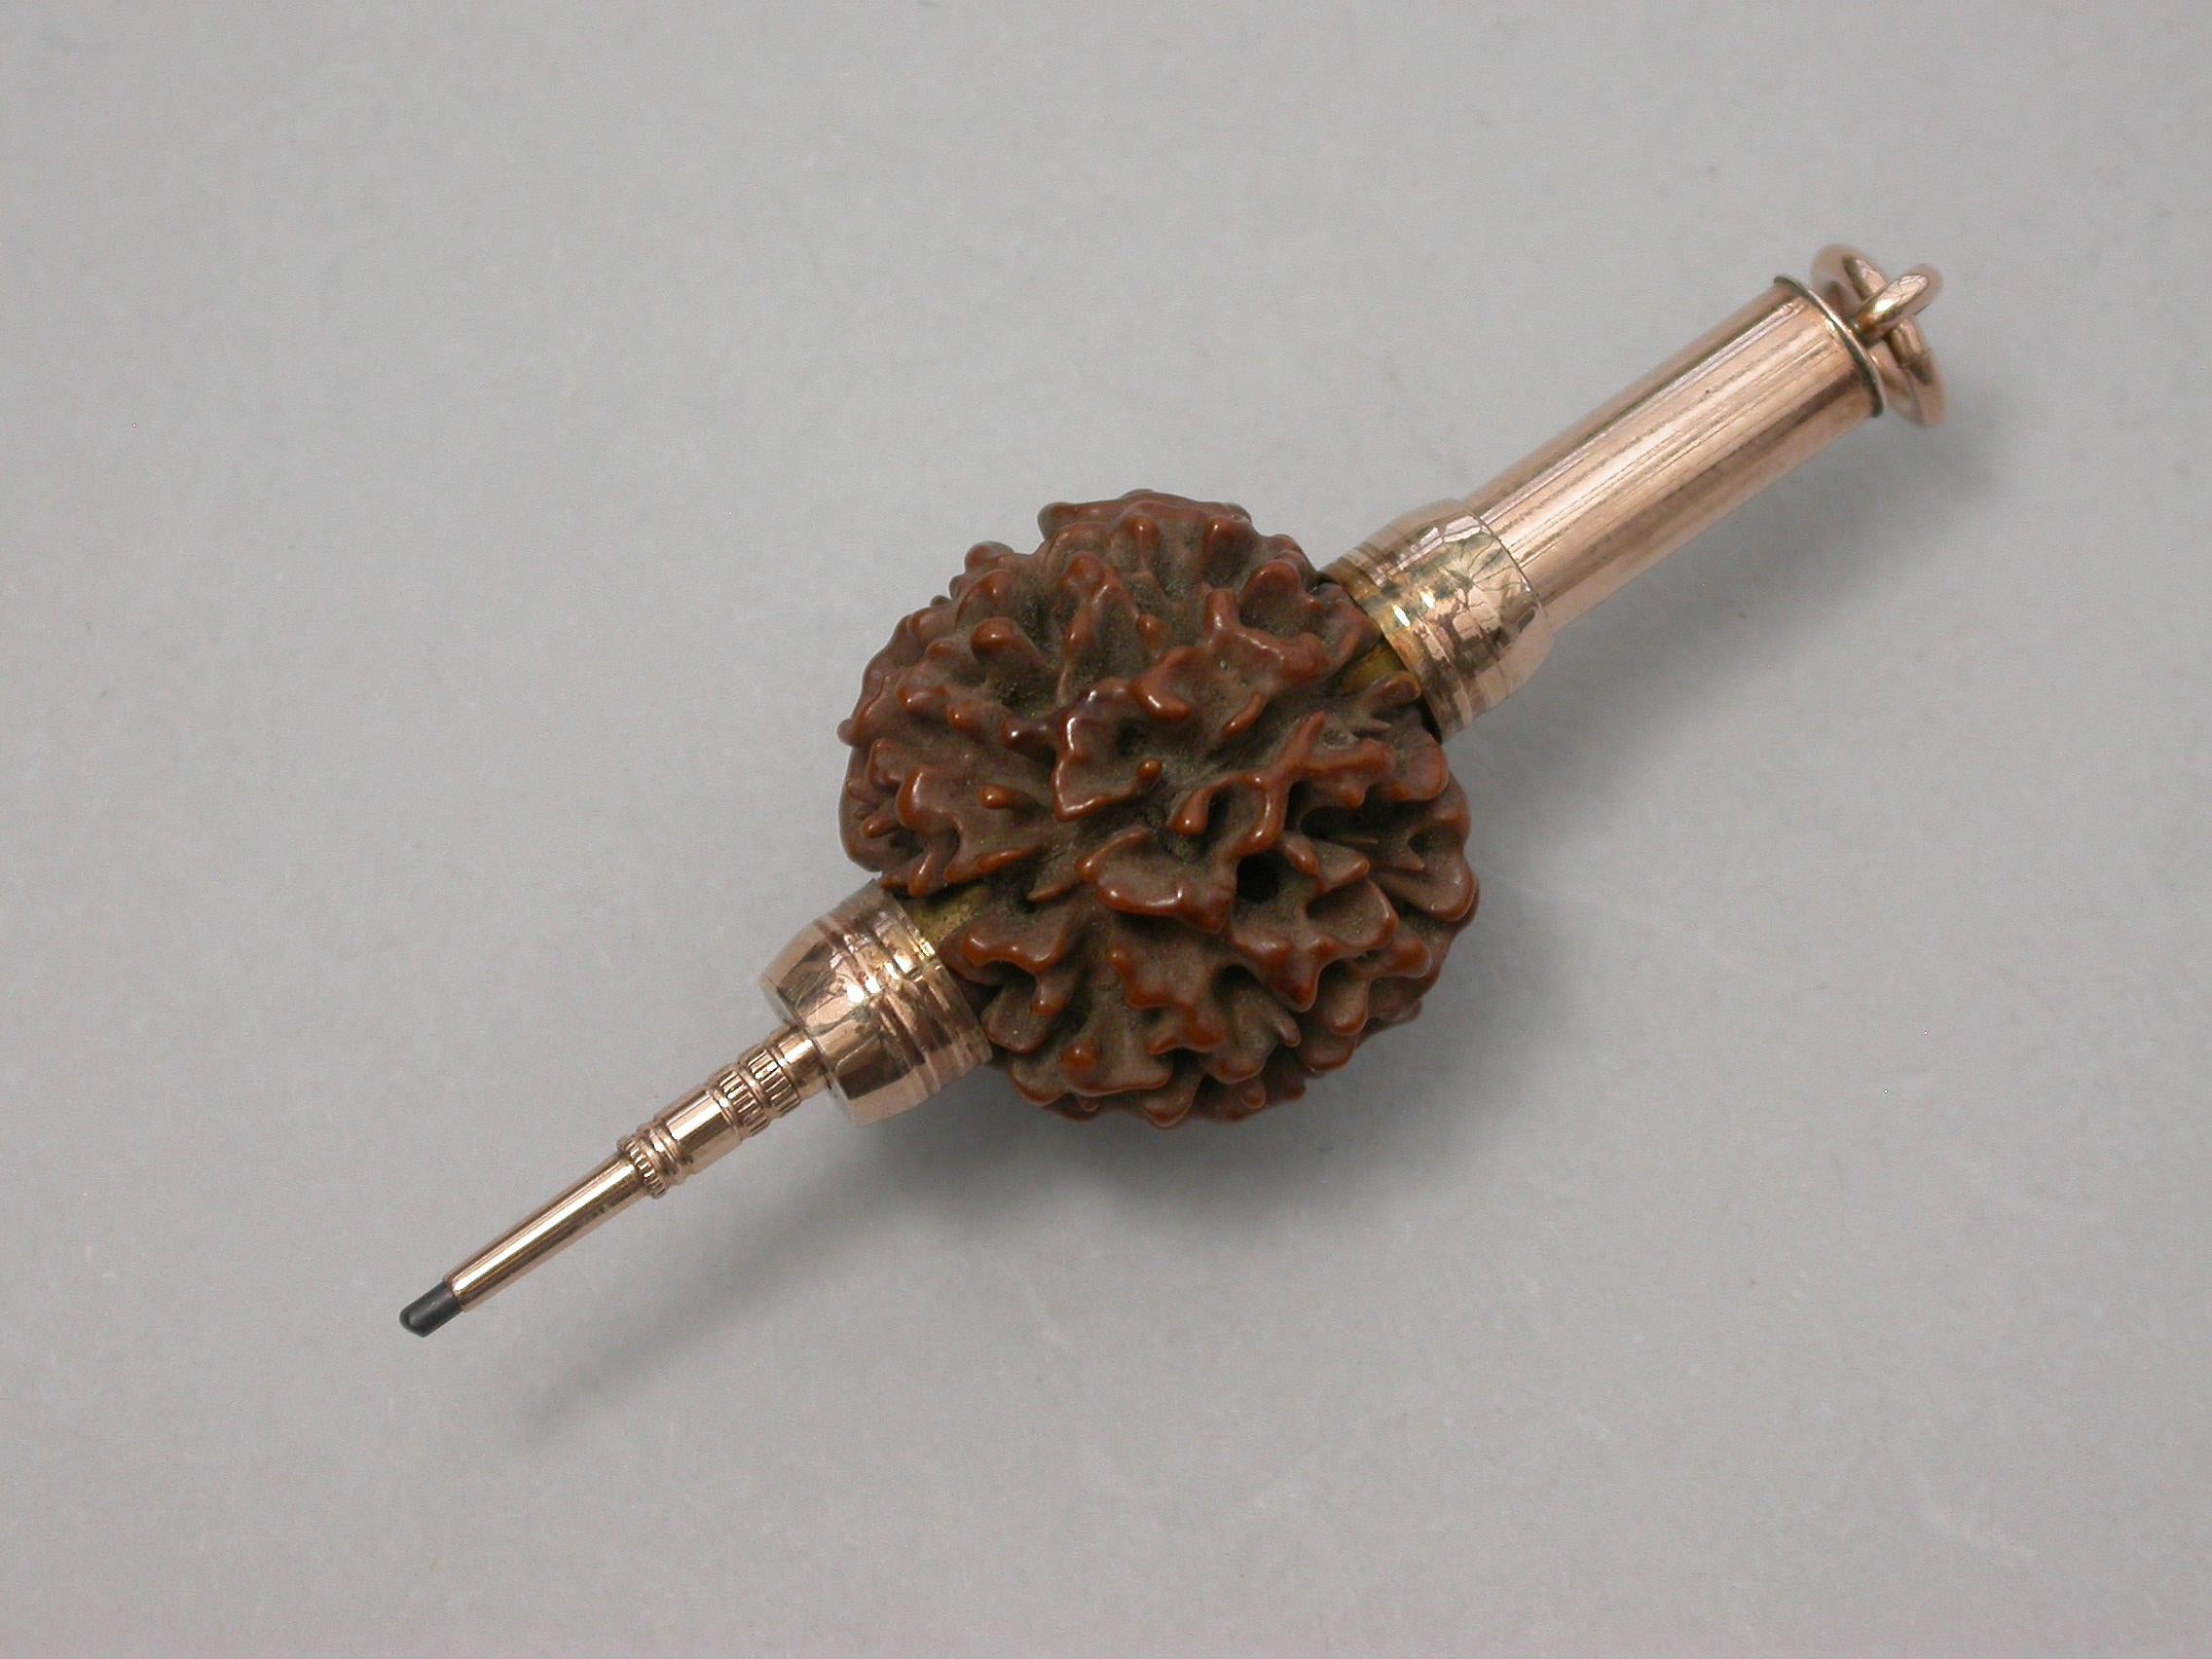 A late 19th century gold mounted novelty telescopic Propelling Pencil formed from a Rudraksha Seed with attached suspension ring.

Unmarked, circa 1880.

Open 58 mm
Closed 32 mm 

In good condition with no damage or repair and in full working